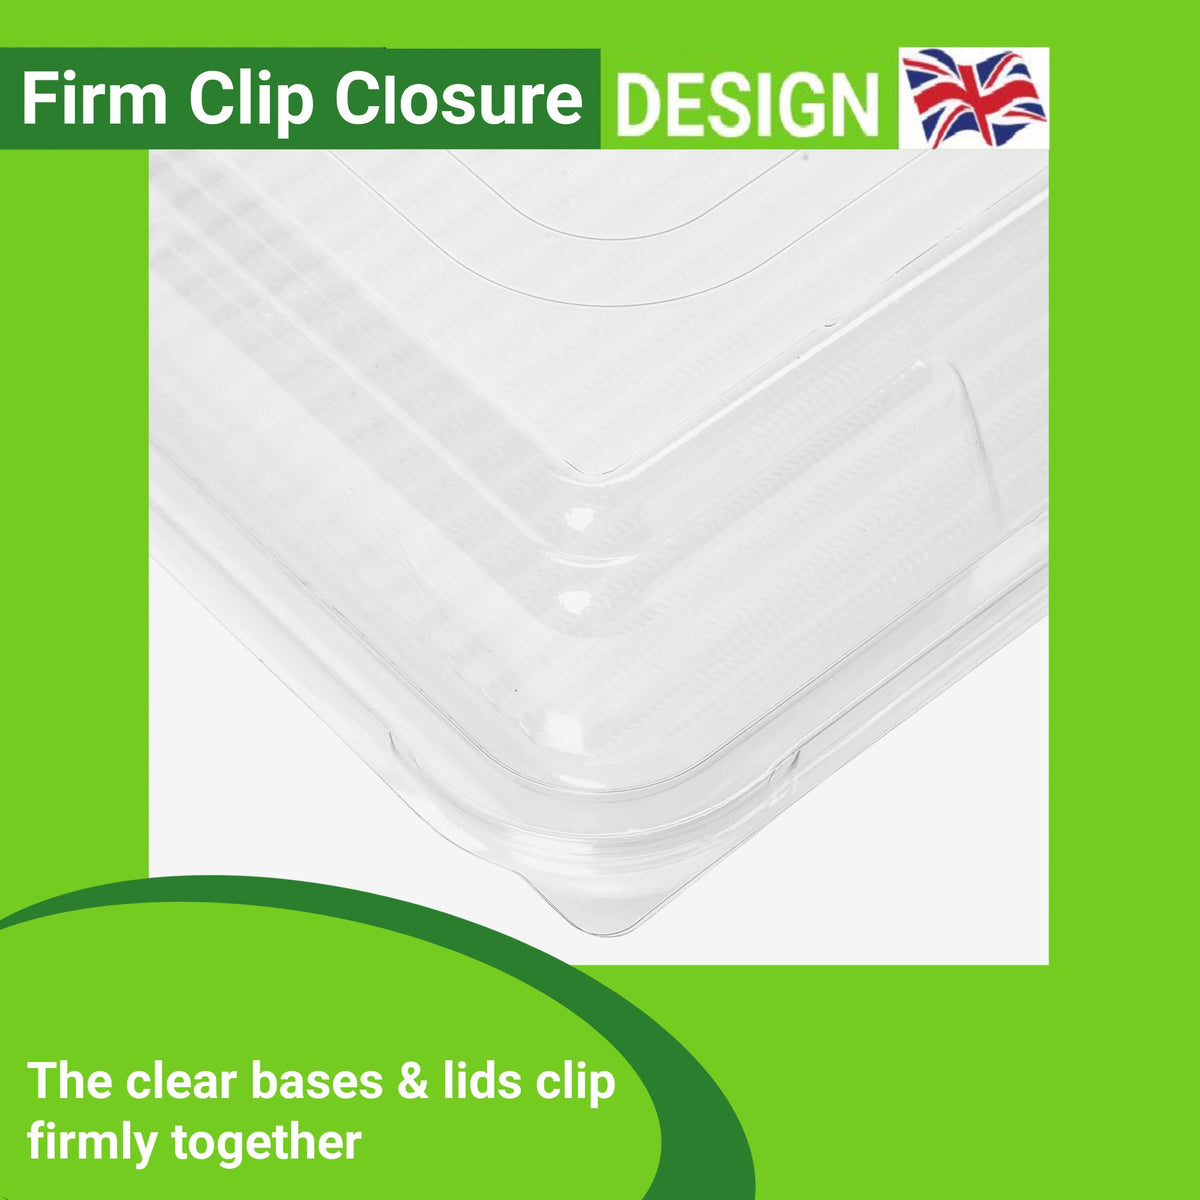 5 Clear Base Medium Buffet Platters & Lids - Clearly The Best !